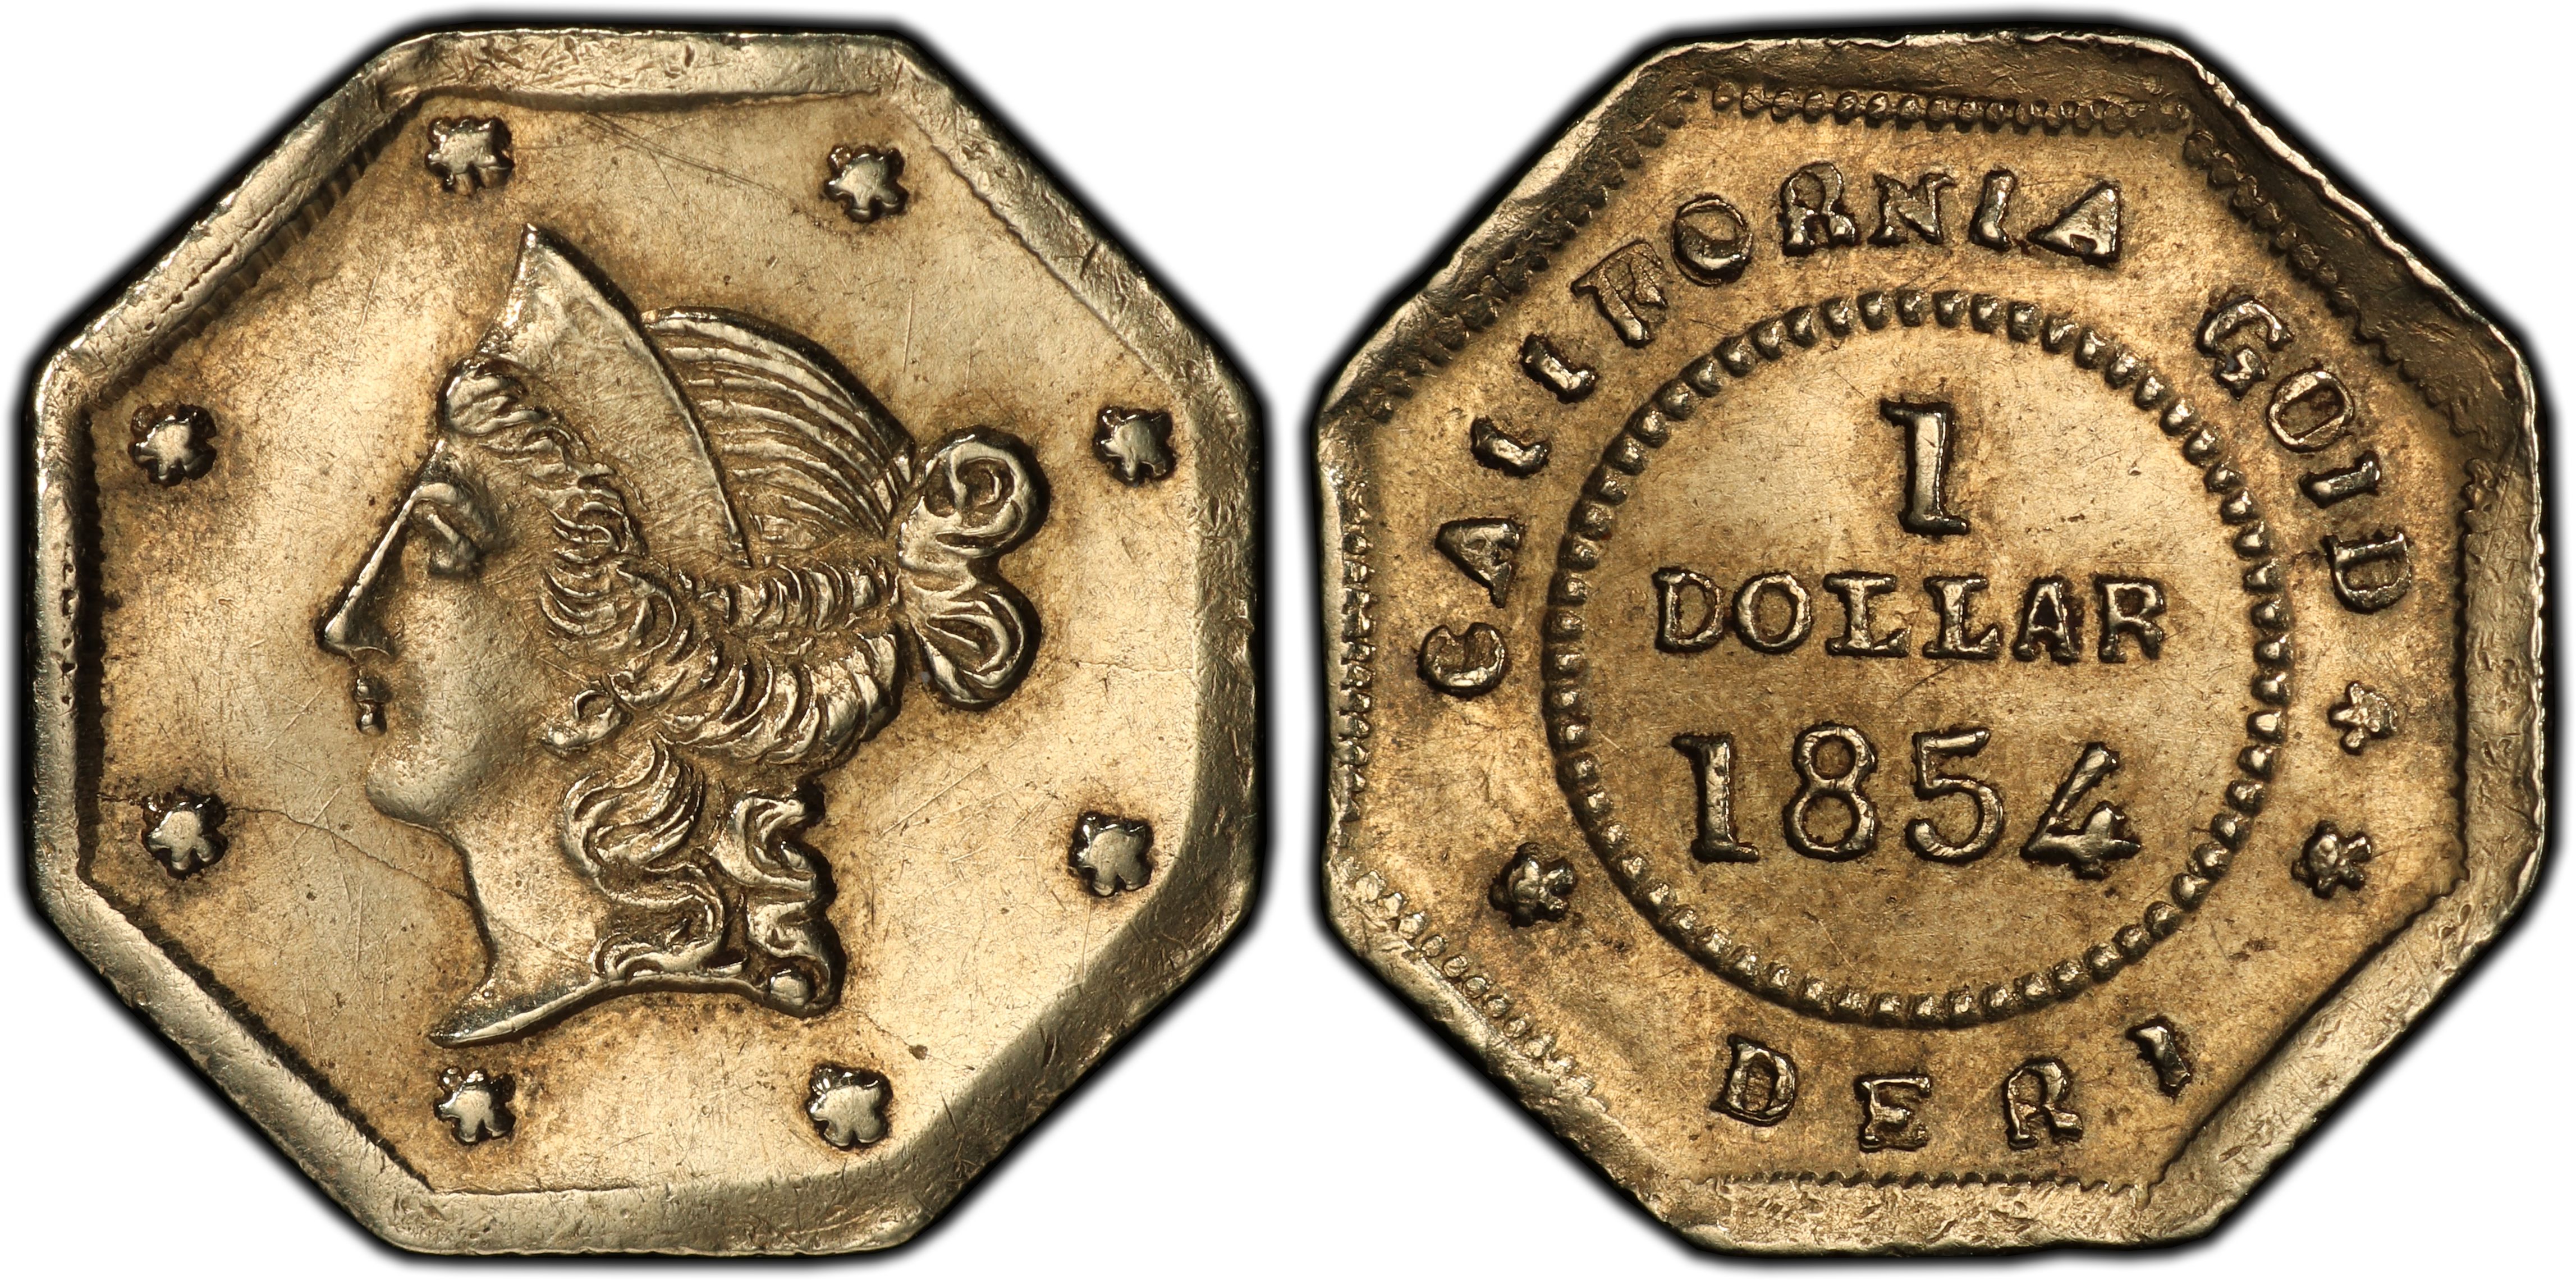 Images of California Fractional Gold 1854 G$1 BG-529 - PCGS CoinFacts